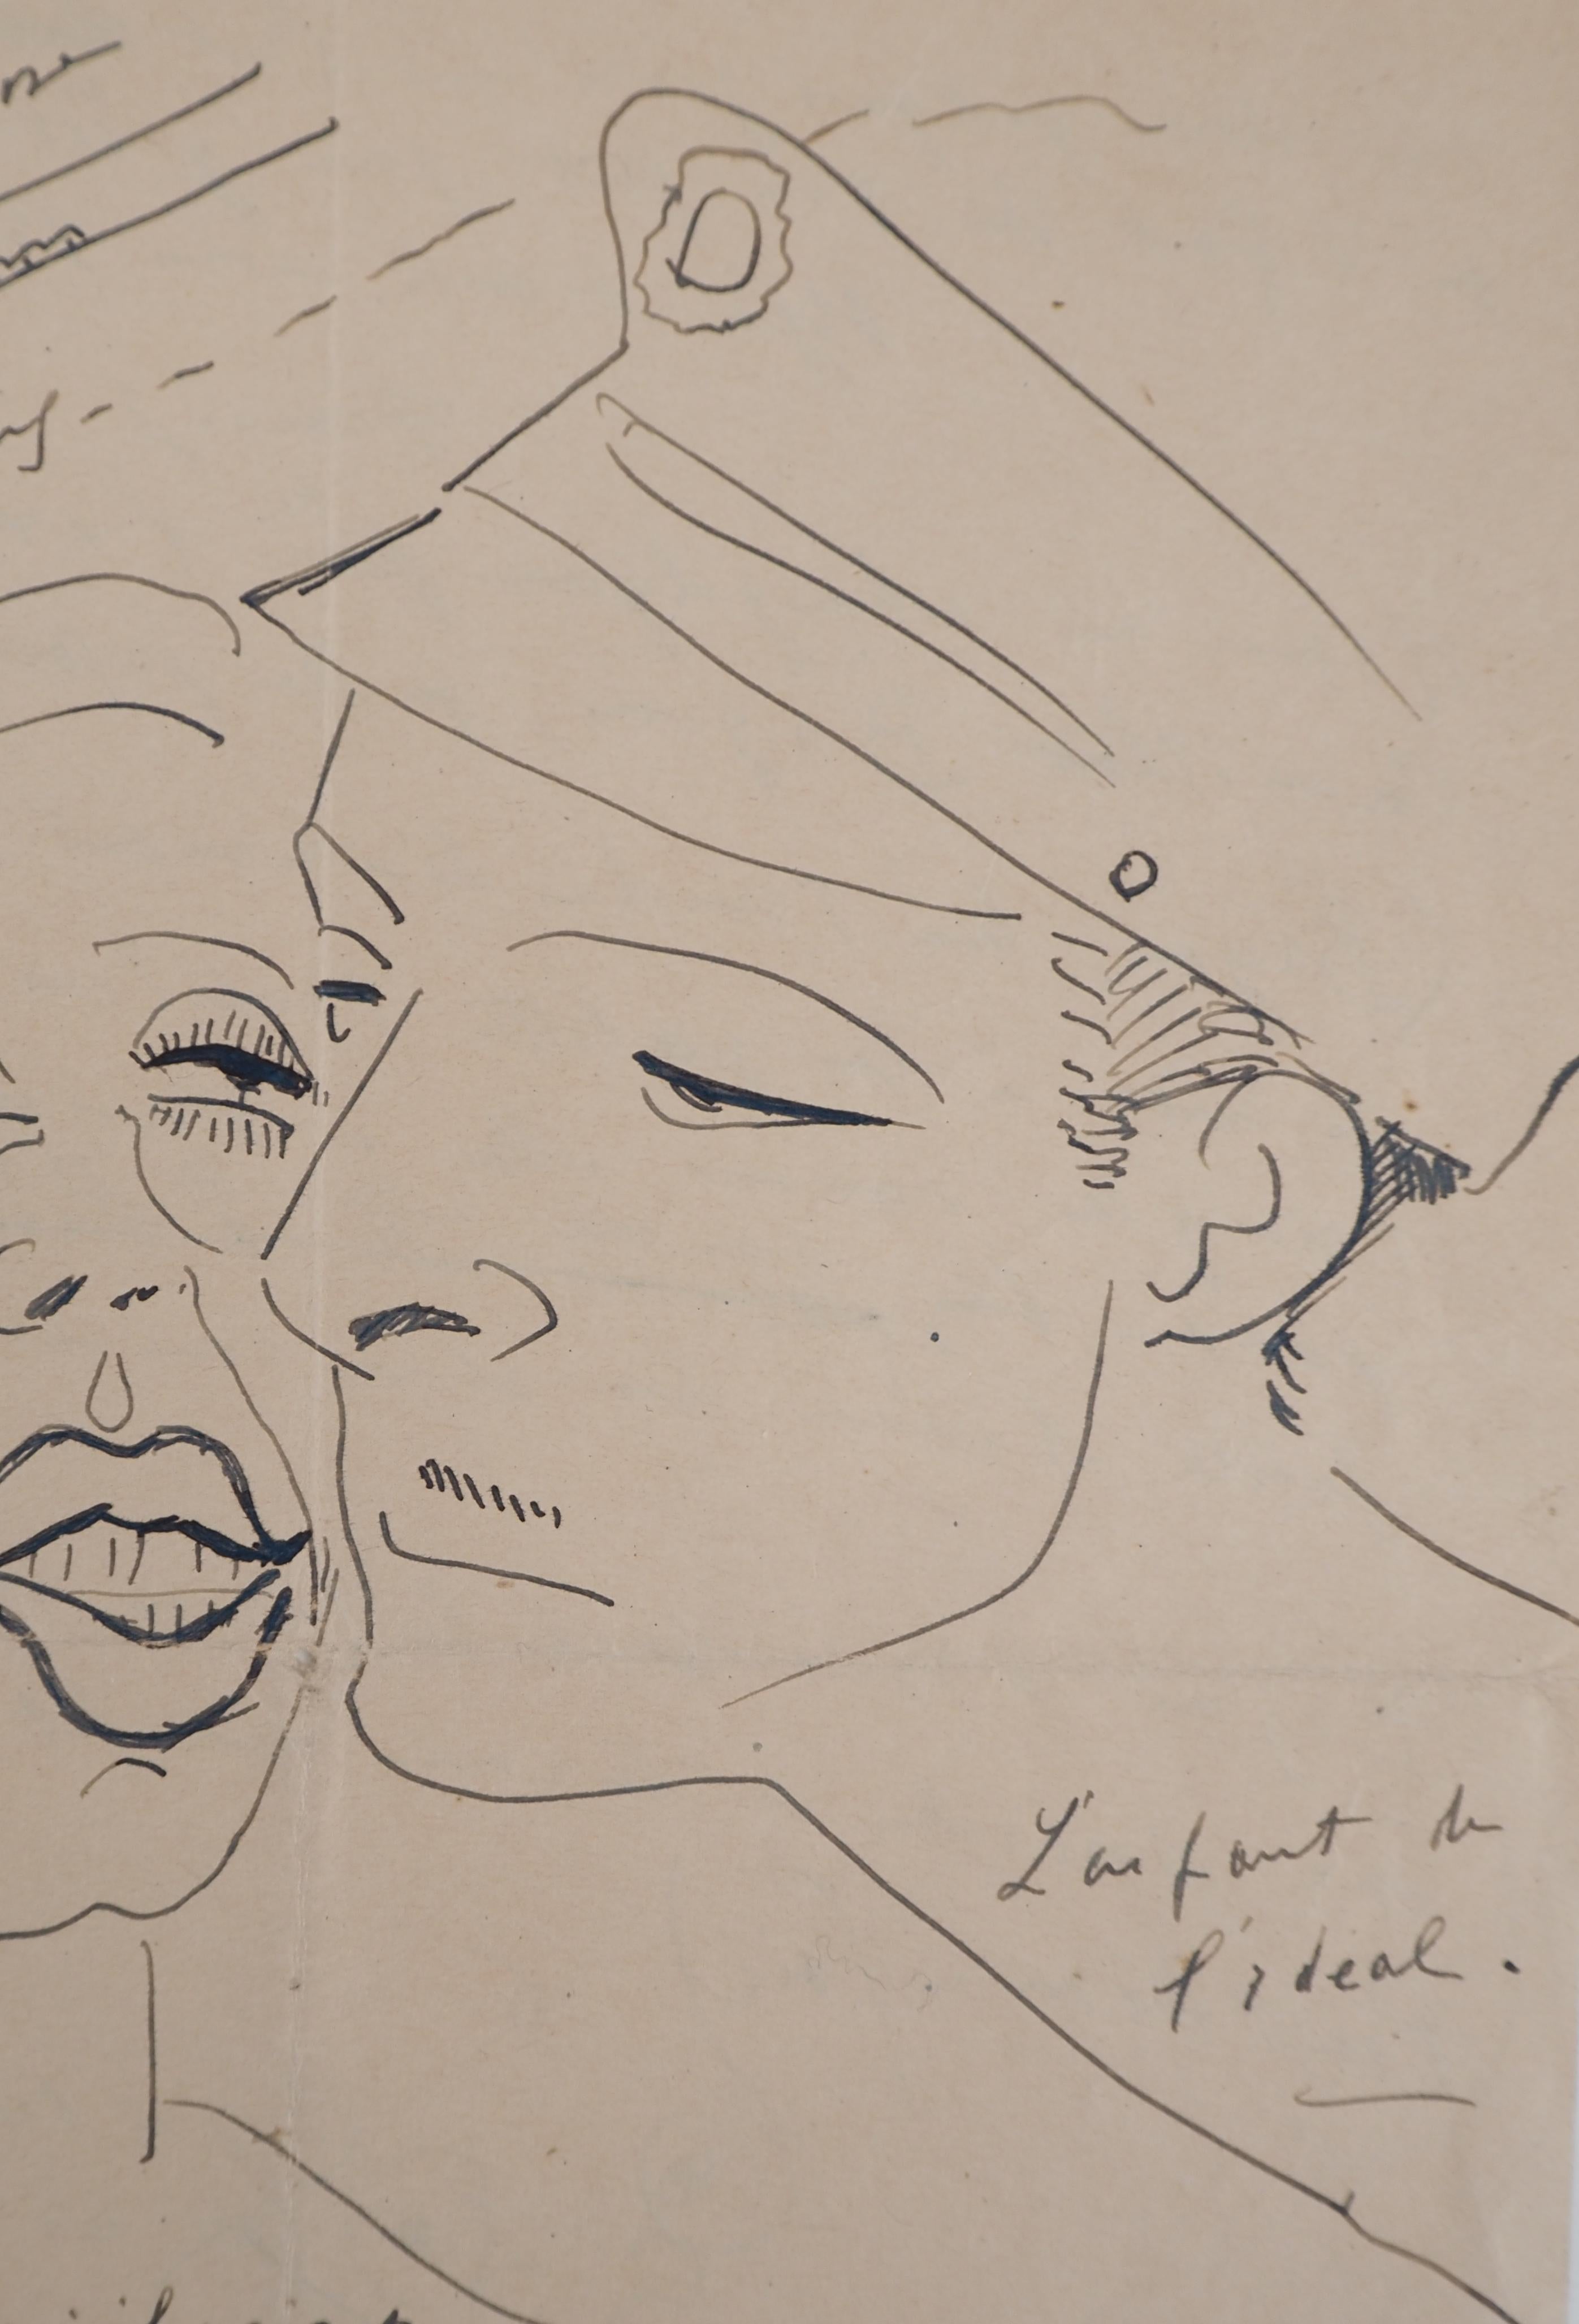 Francis PICABIA
Couple, The Kiss, 1949

Original Ink Drawing
Handsigned 'Francis' on the back
On paper 27 x 21 cm (c. 11 x 8 in)
This drawing is on the first side of a letter. On the back there is the other part of the letter with another small